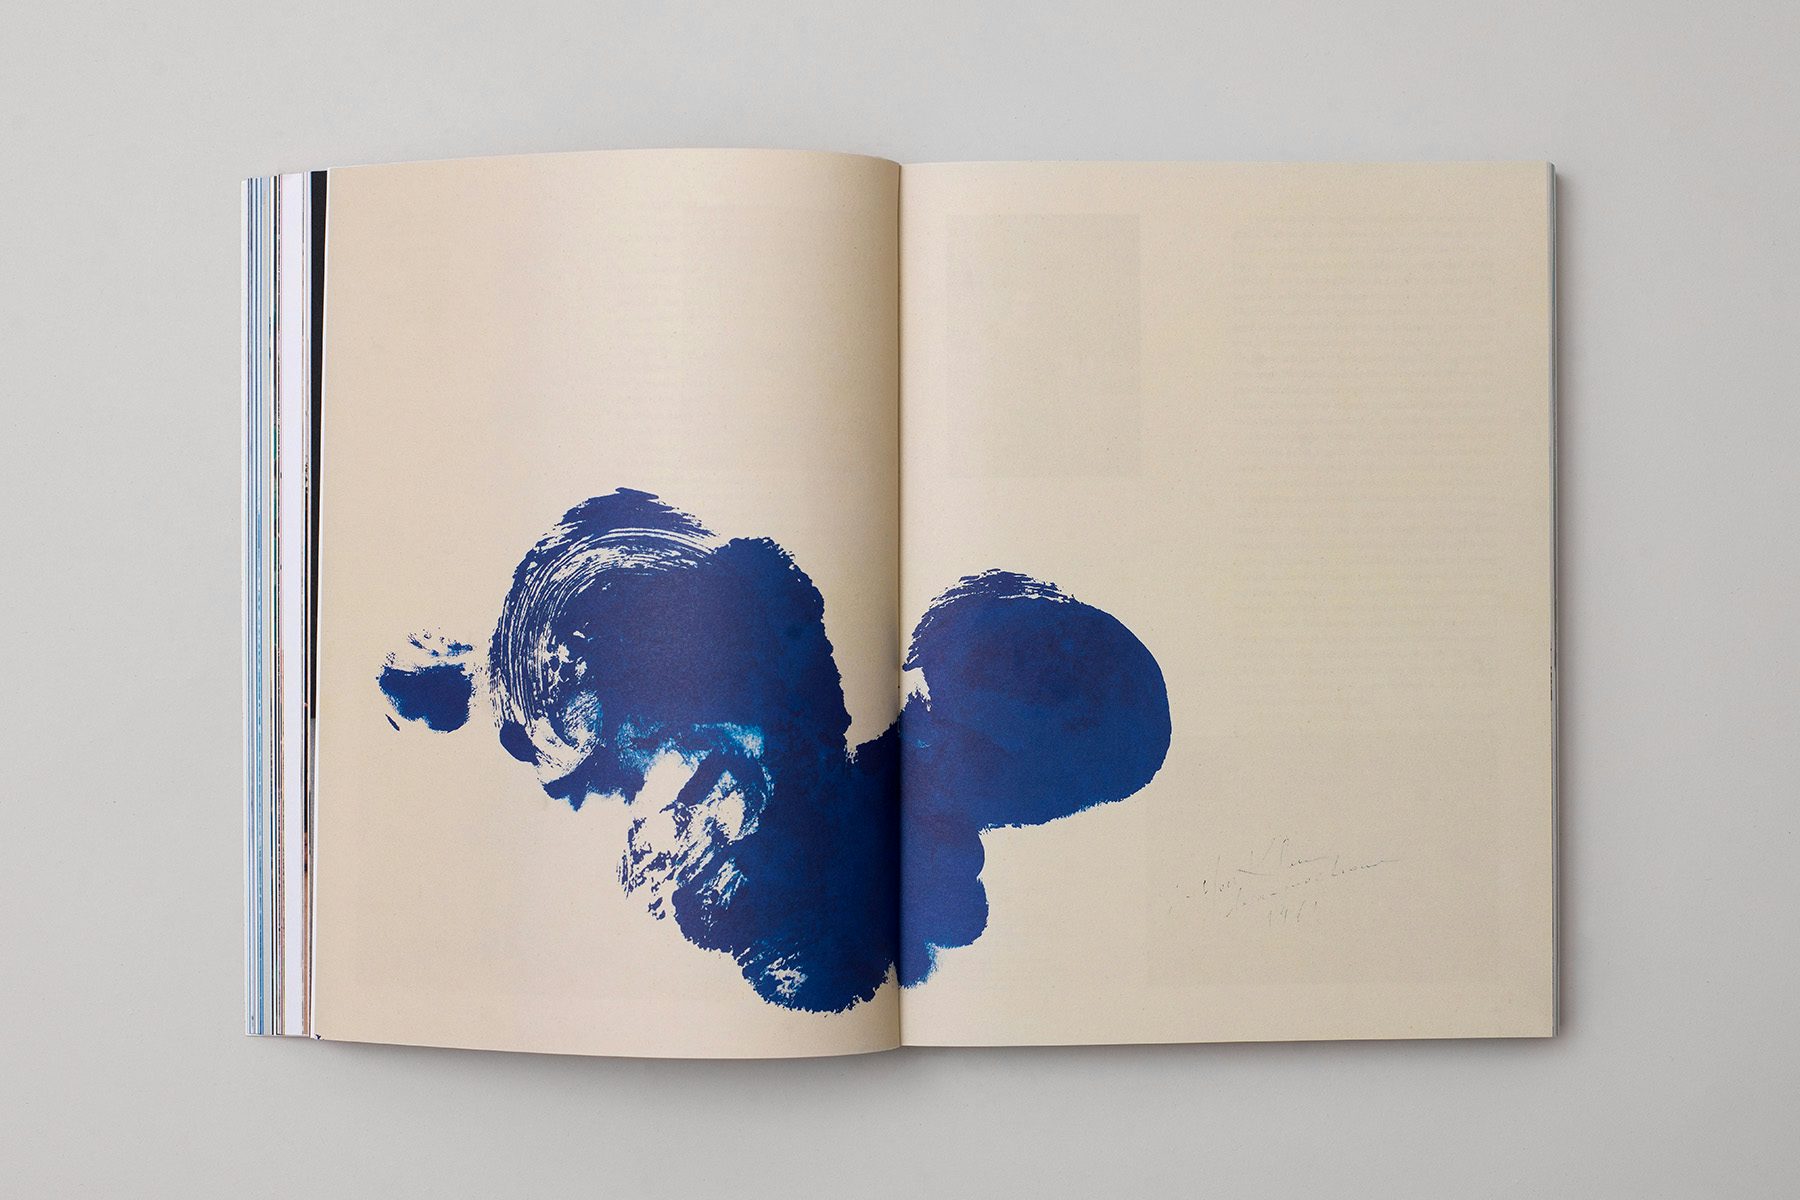 Photograph of a spread from the Blue issue of The Colour Journal, showing the image of dark blue smudged paint in the style of a rorschach image